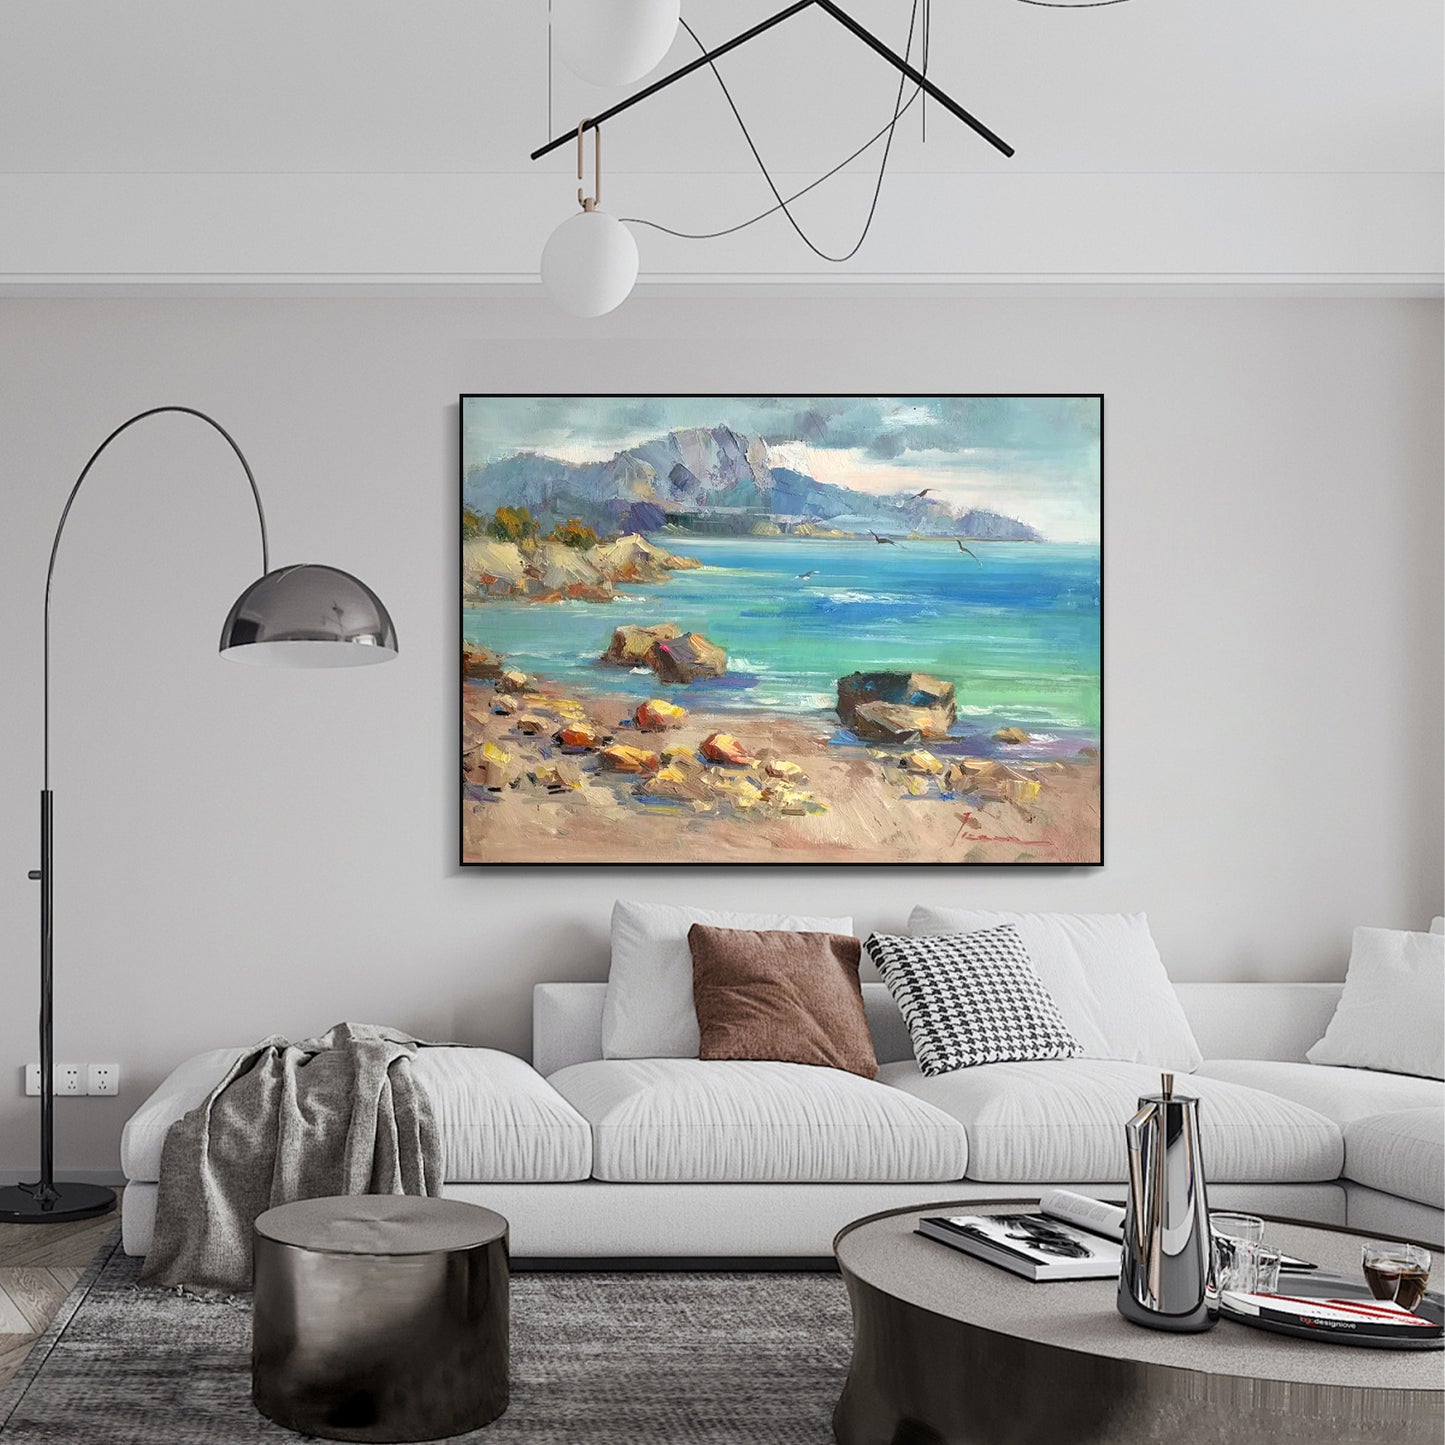 LANDSCAPE PAINTING, COASTAL VIEW WITH SEAGULL, HAND-PAINTED CANVAS